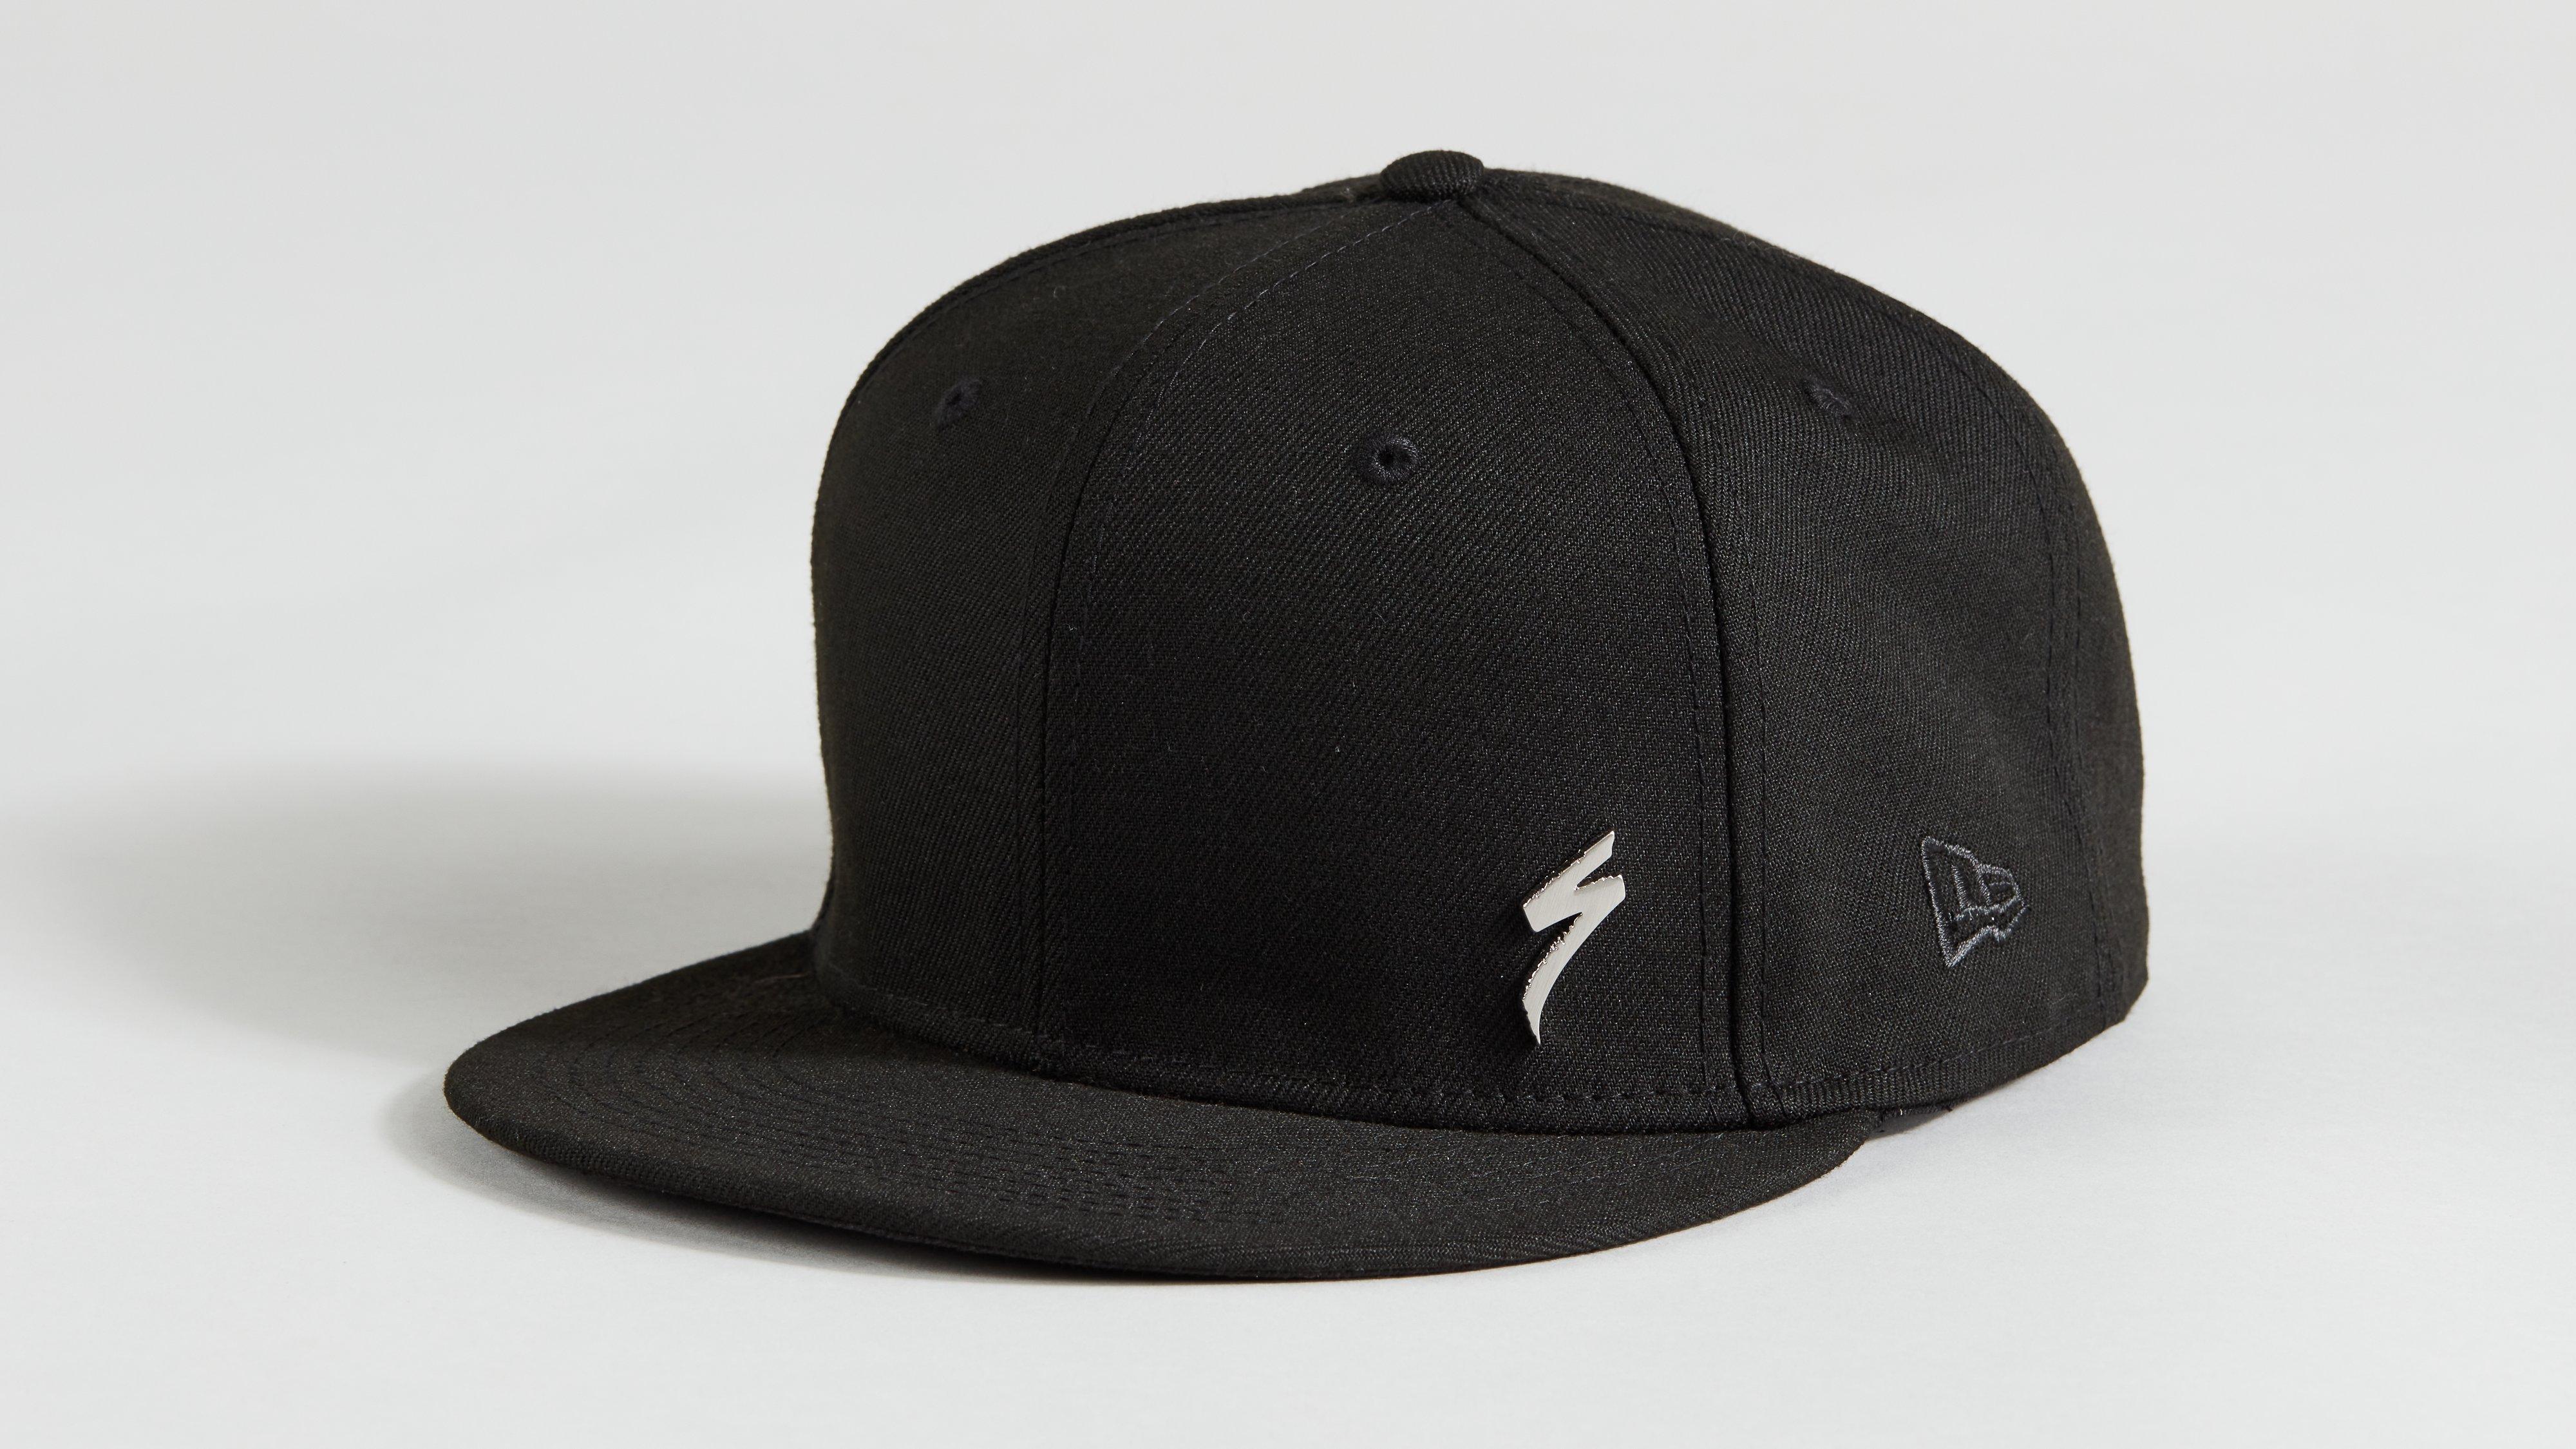 https://assets.specialized.com/i/specialized/64822-160_APP_NEW-ERA-METAL-9FIFTY-SNAPBACK-HAT-BLK-OSFA_HERO?$scom-pdp-product-image$&fmt=auto